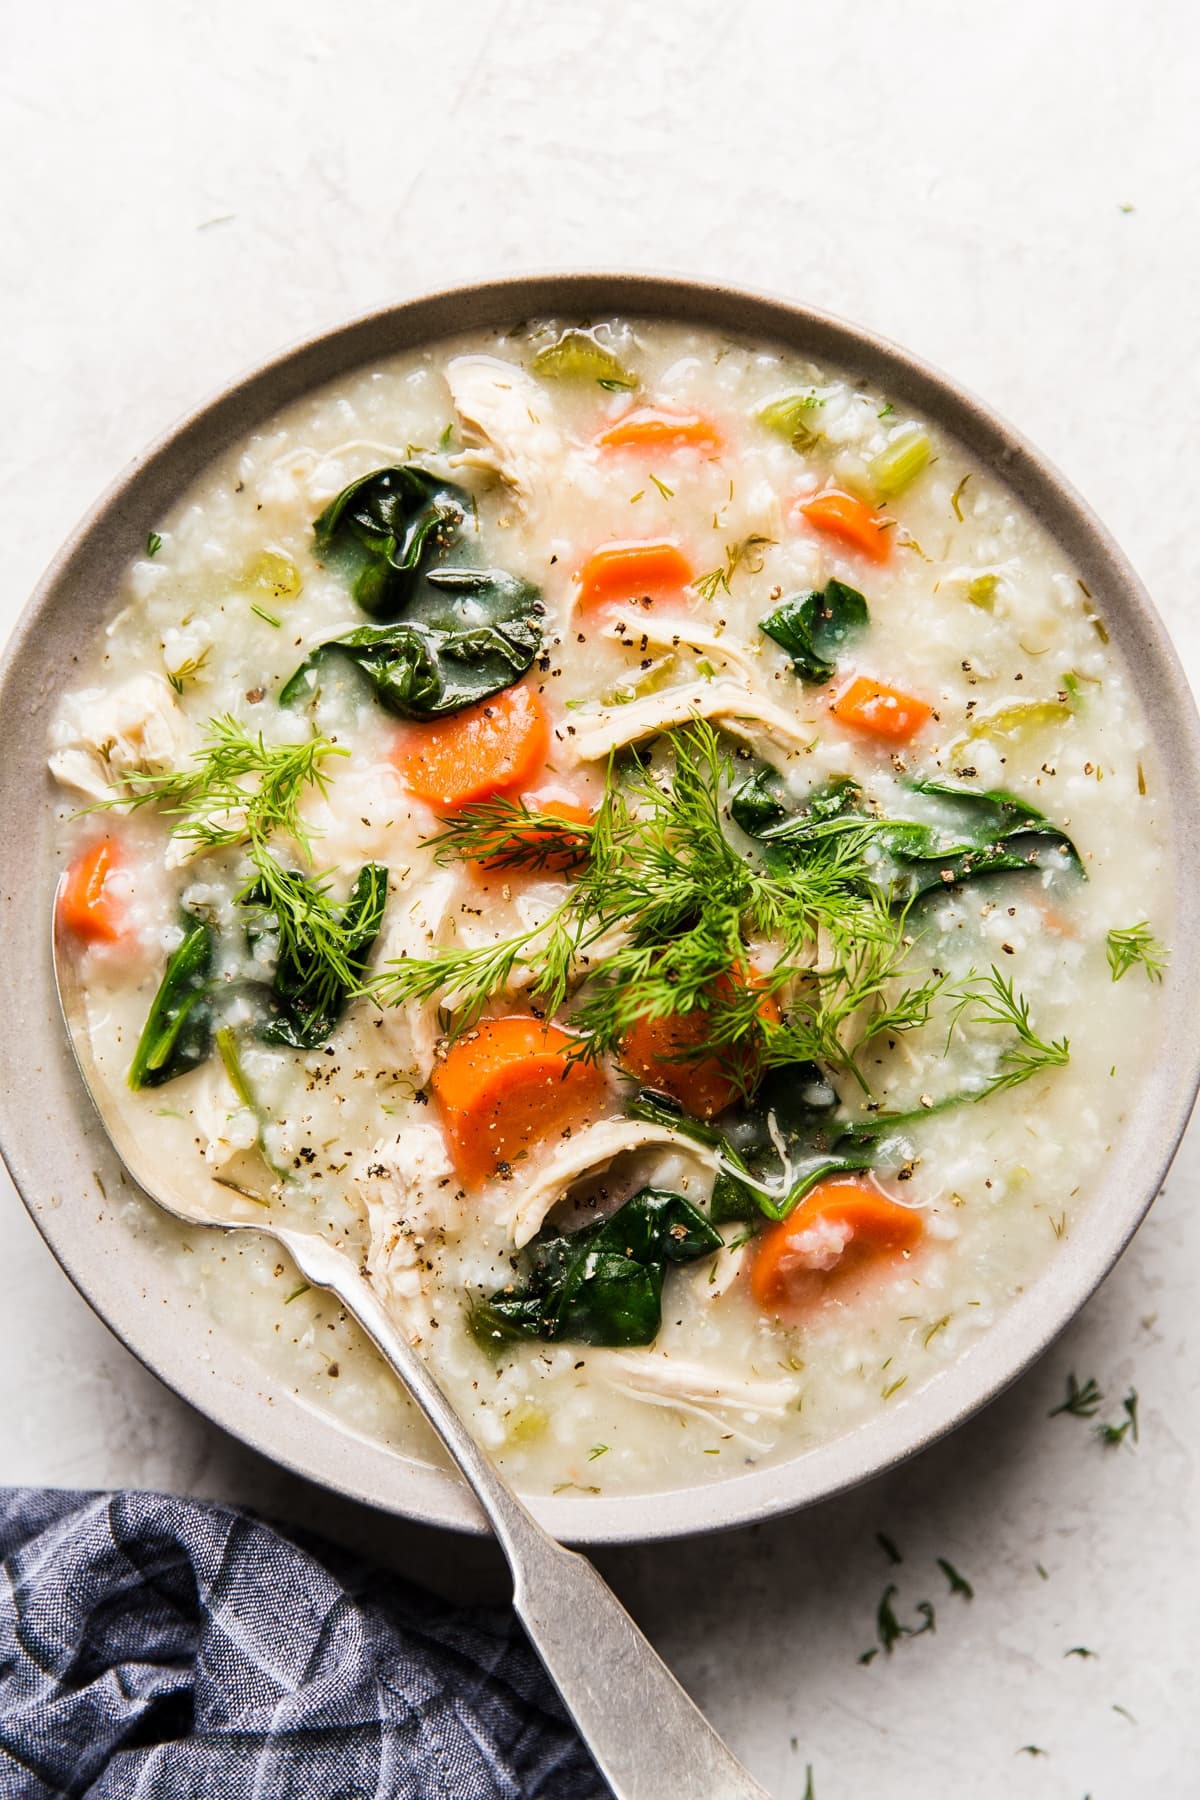 Chicken and rice soup with carrots, spinach, dill and lemon